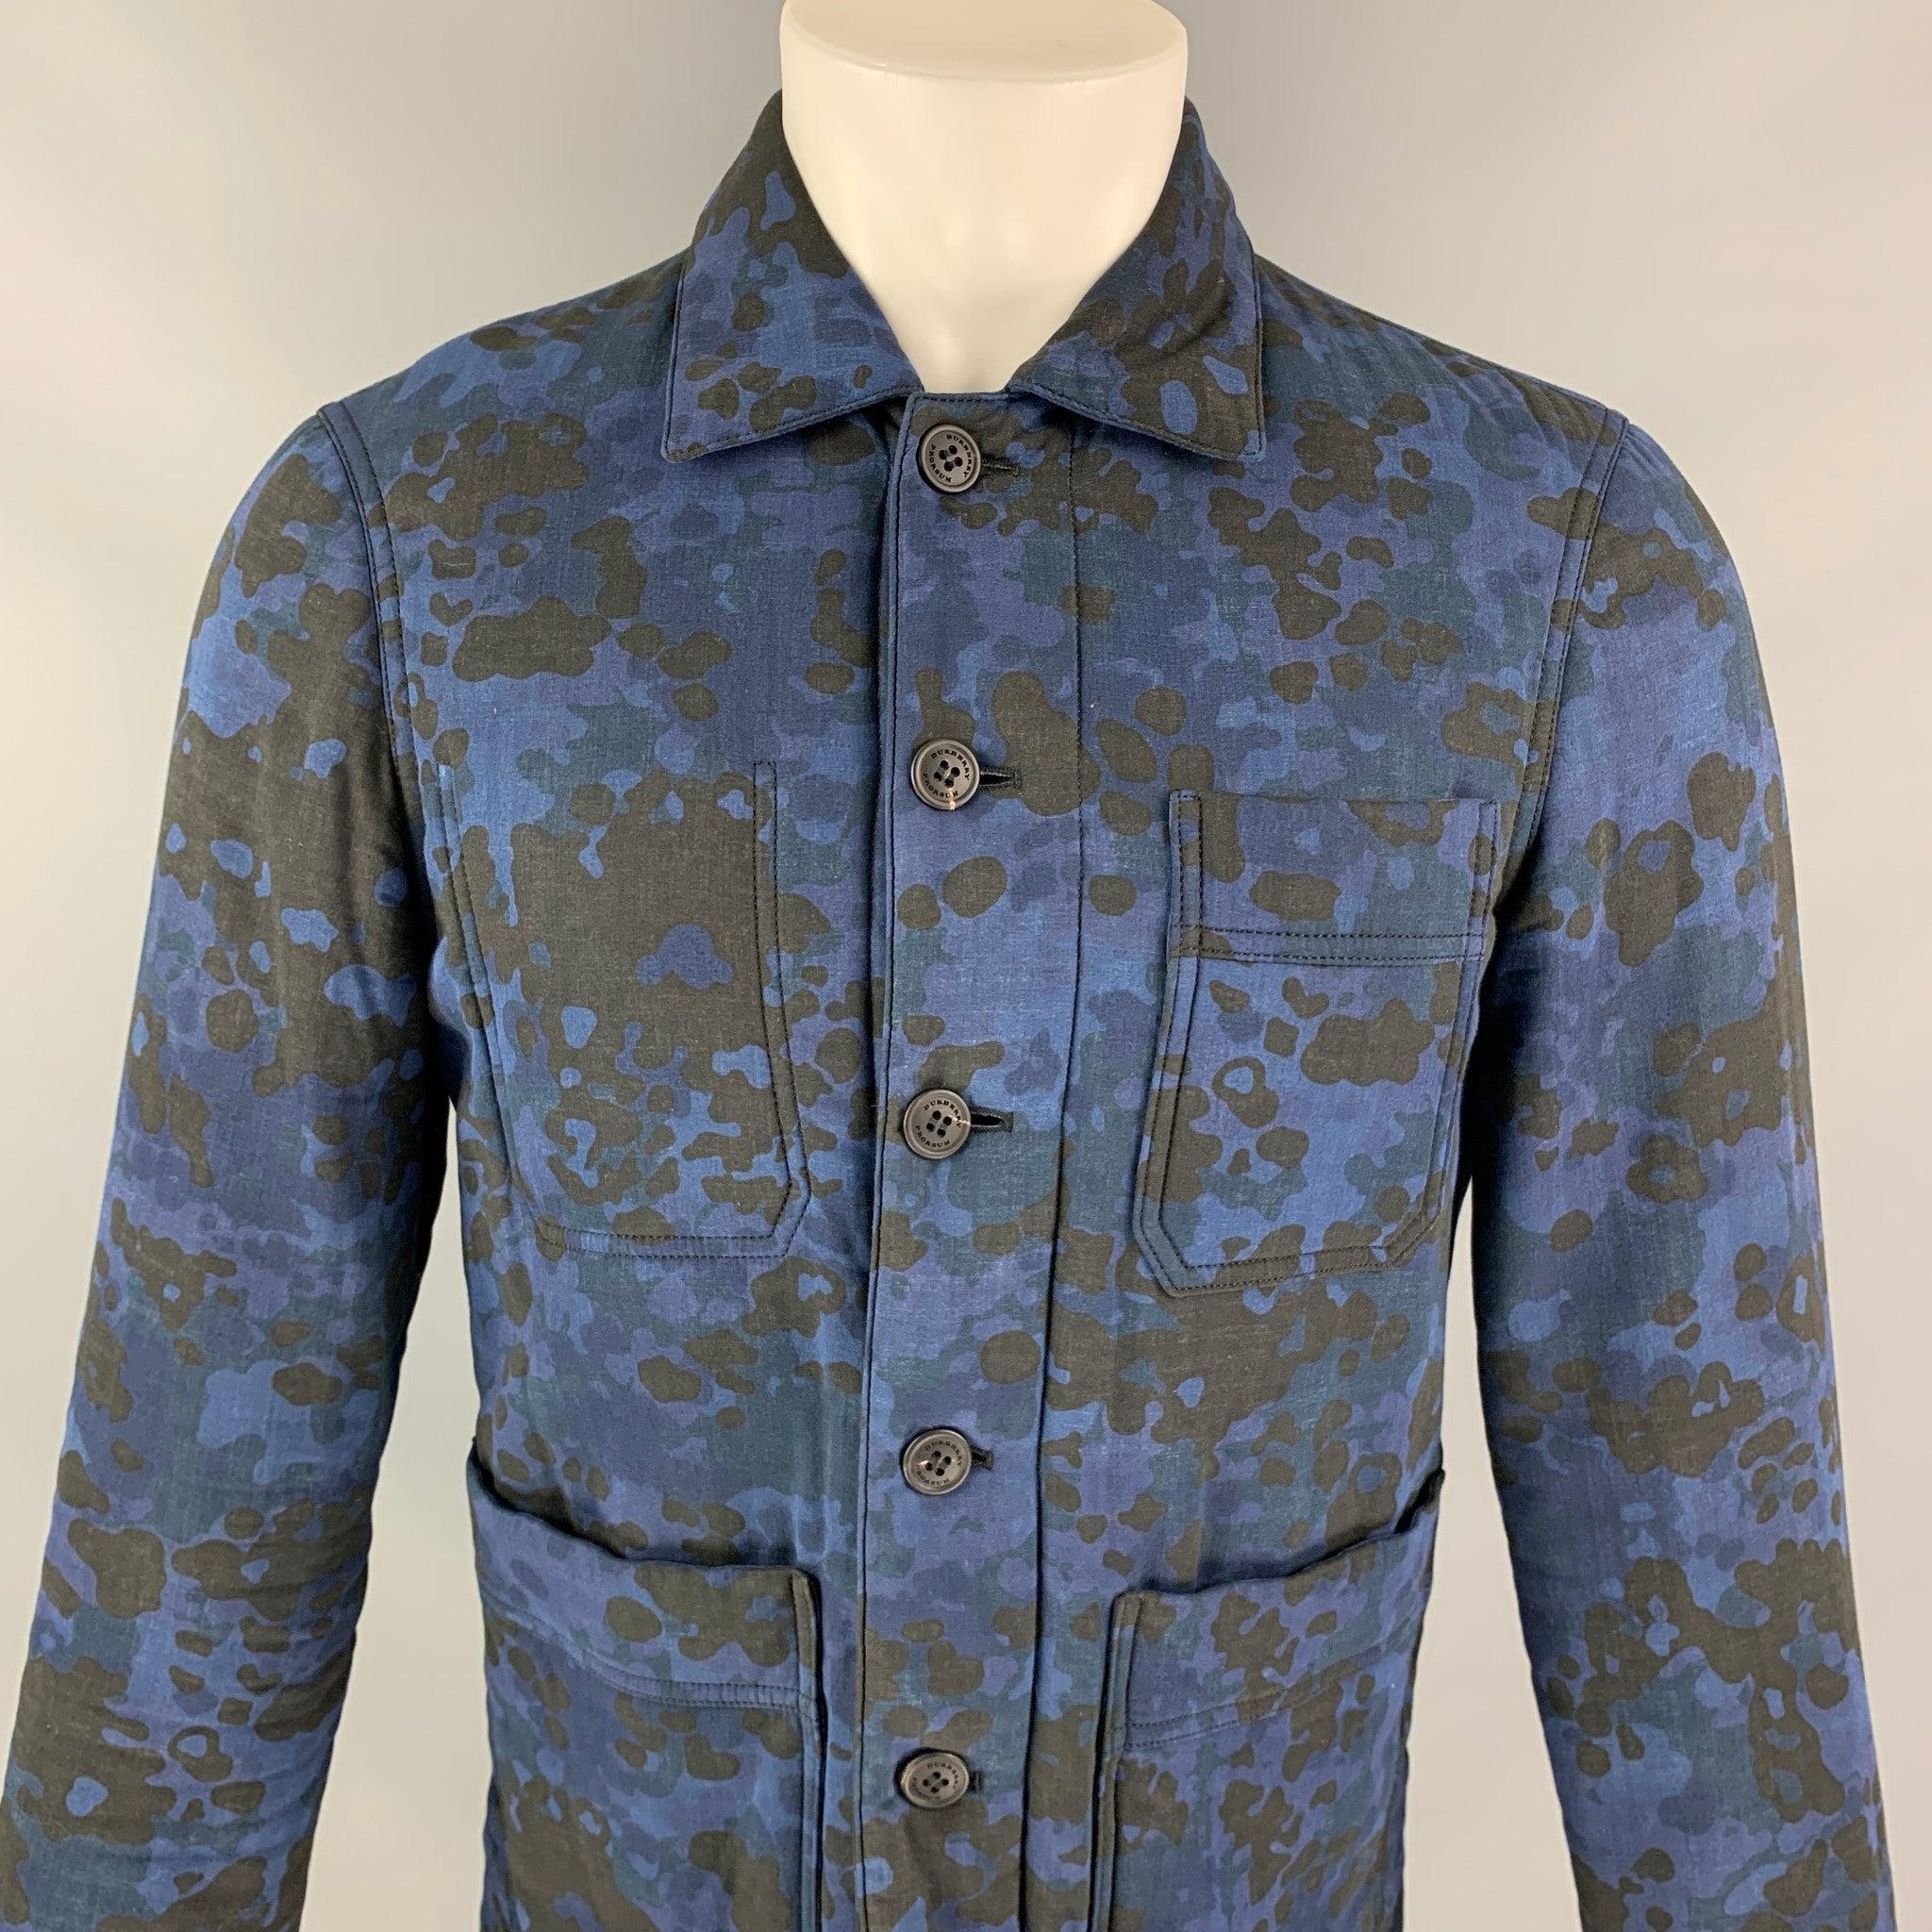 Burberry Camo Floral Print Trucker Jacket featuring a blue tone camouflage print, point collar, patch pickets & button closure.Very Good Pre-Owned Condition. Faint wear, interior brand tag has pen mark. 

Marked:   S  US36, IT46 

Measurements: 
 